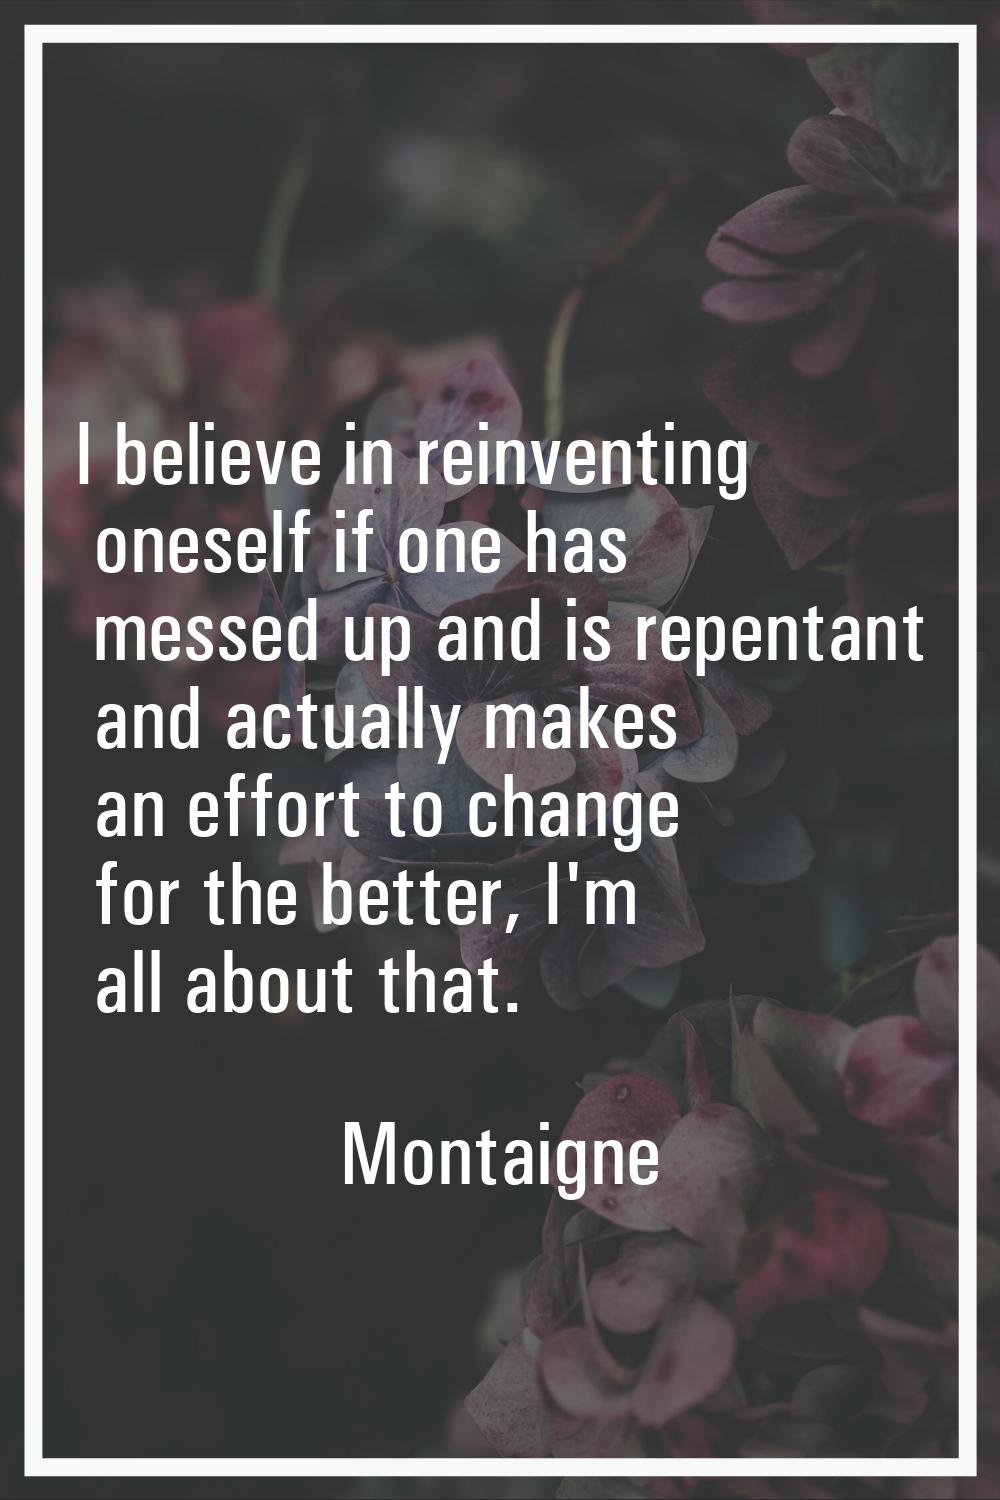 I believe in reinventing oneself if one has messed up and is repentant and actually makes an effort